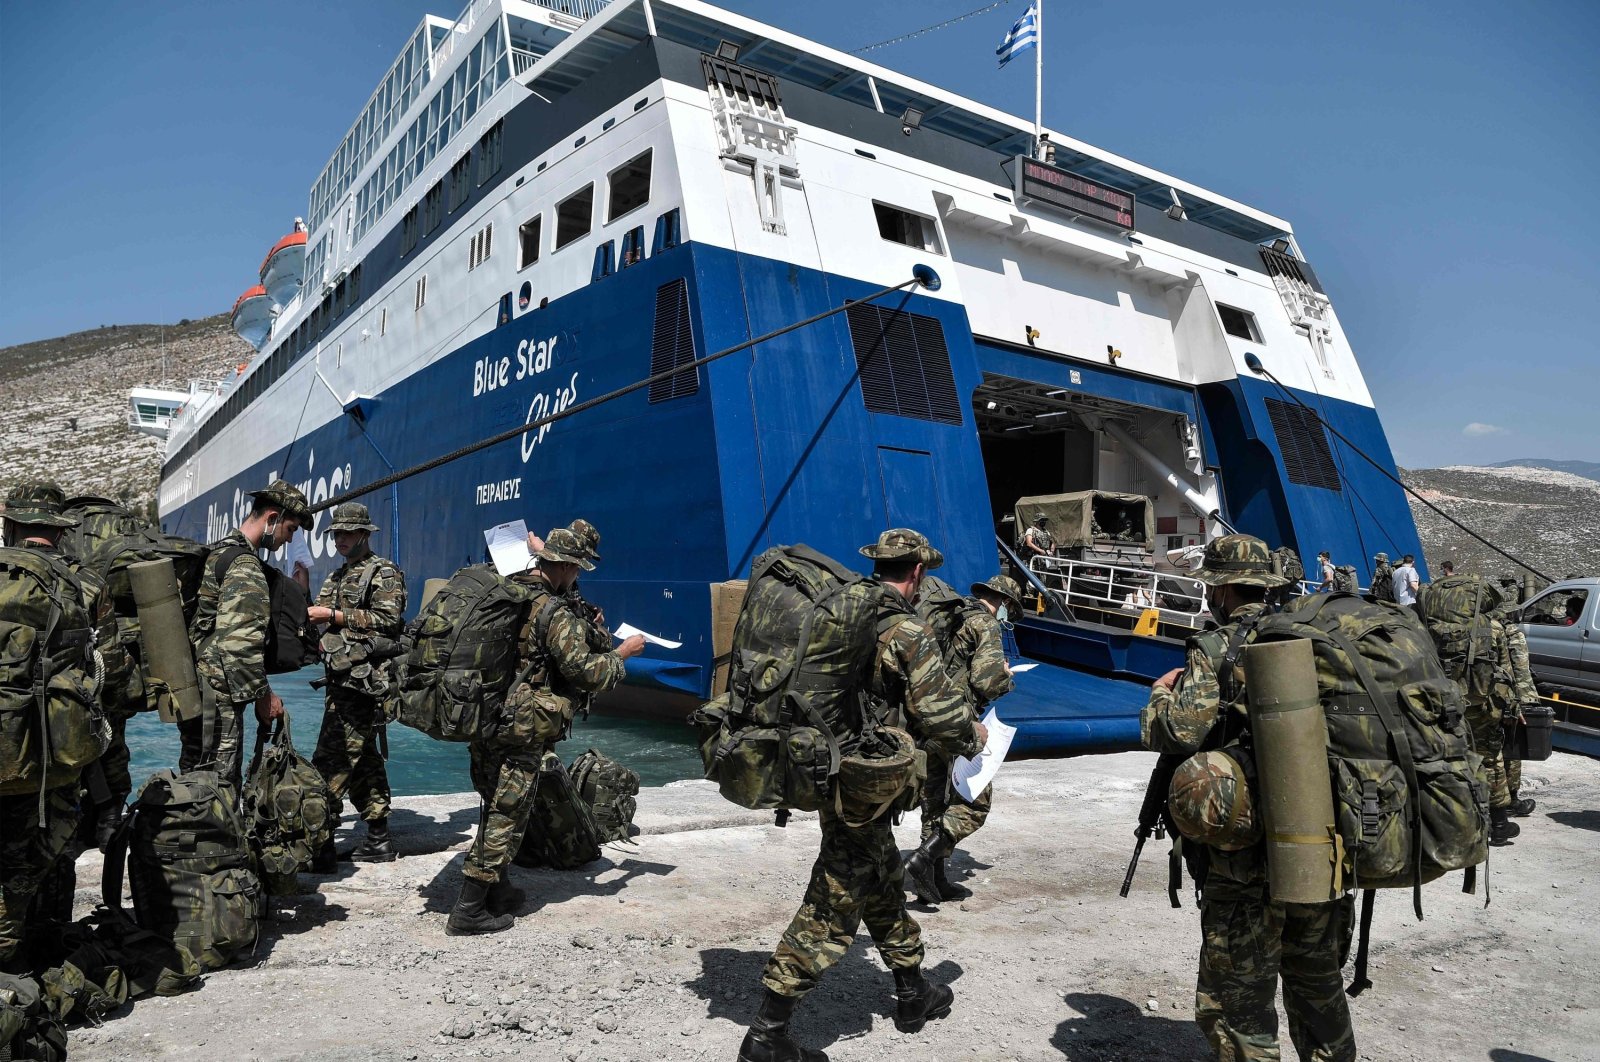 Greek soldiers prepare to board a ferry at the port of the tiny Greek island of Kastellorizo (Megisti-Meis), the most southeastern inhabited Greek island in the Dodecanese, situated two kilometers off the south coast of Turkey. (AFP Photo)